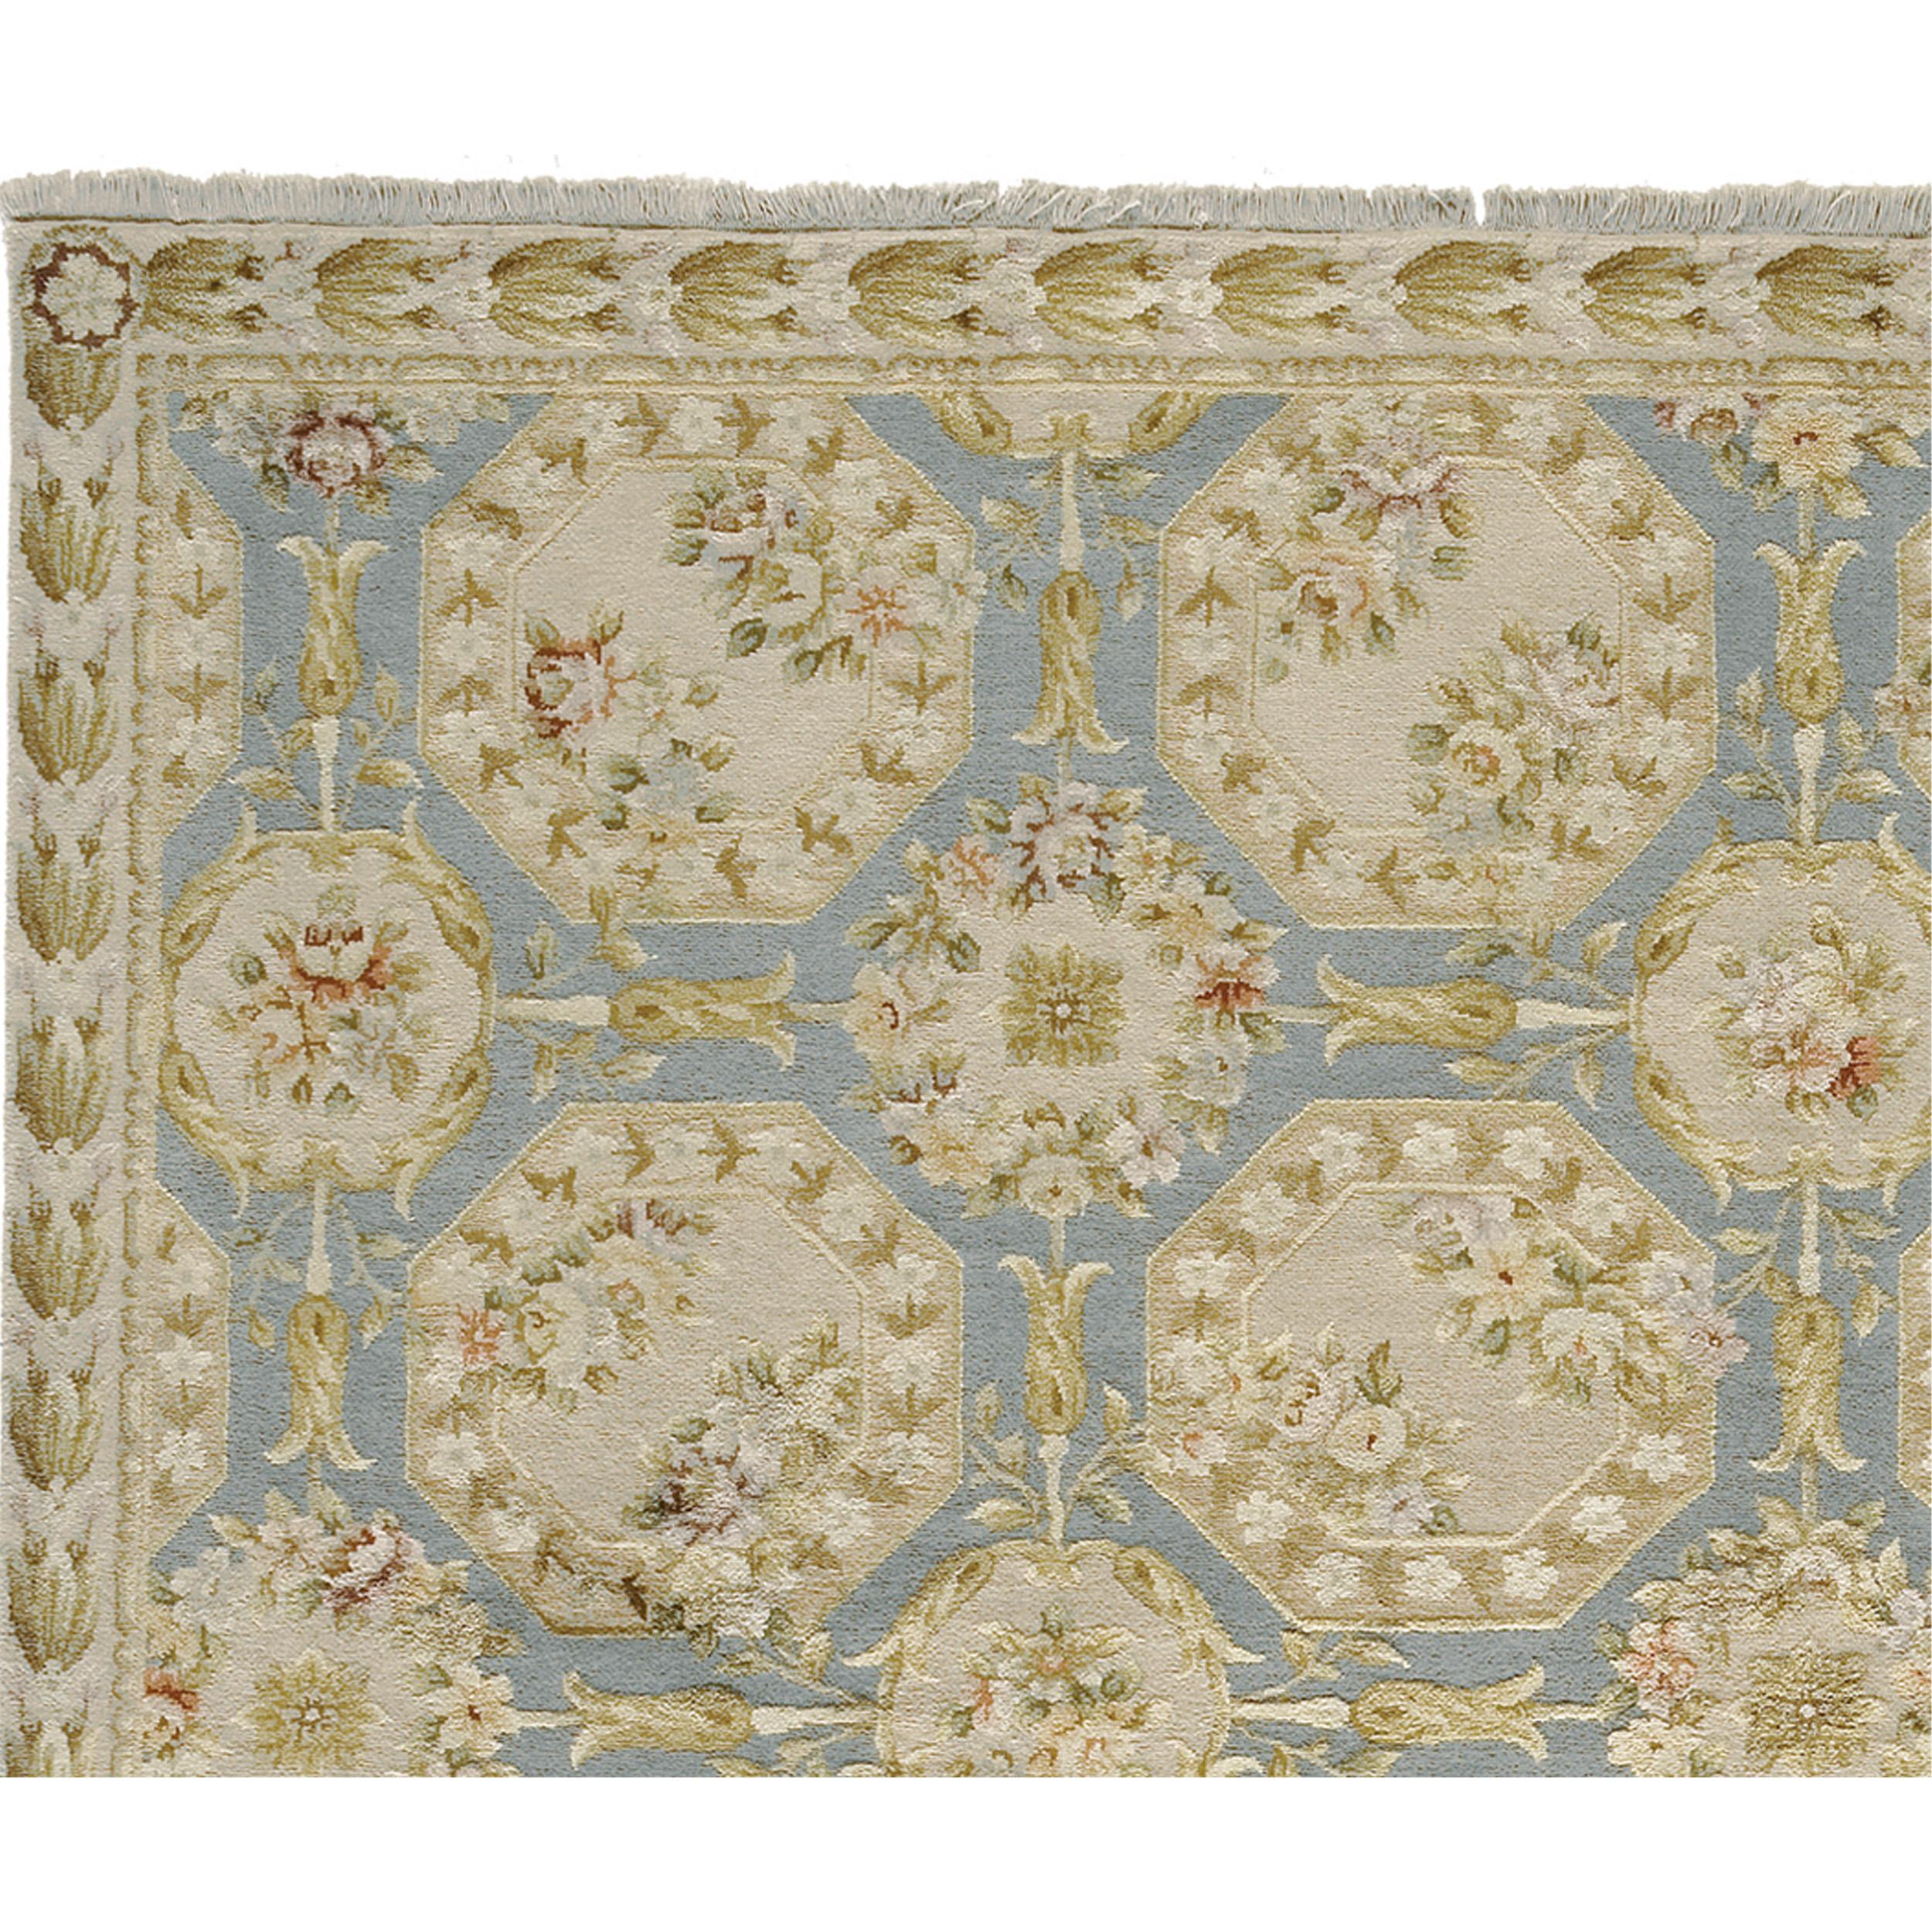 Originating from the skilled craftsmanship of China, this piece is a prime example of piled carpet artistry, seamlessly blending traditional French and European design. The ground color of this carpet is formed from the rich resilient fibers of